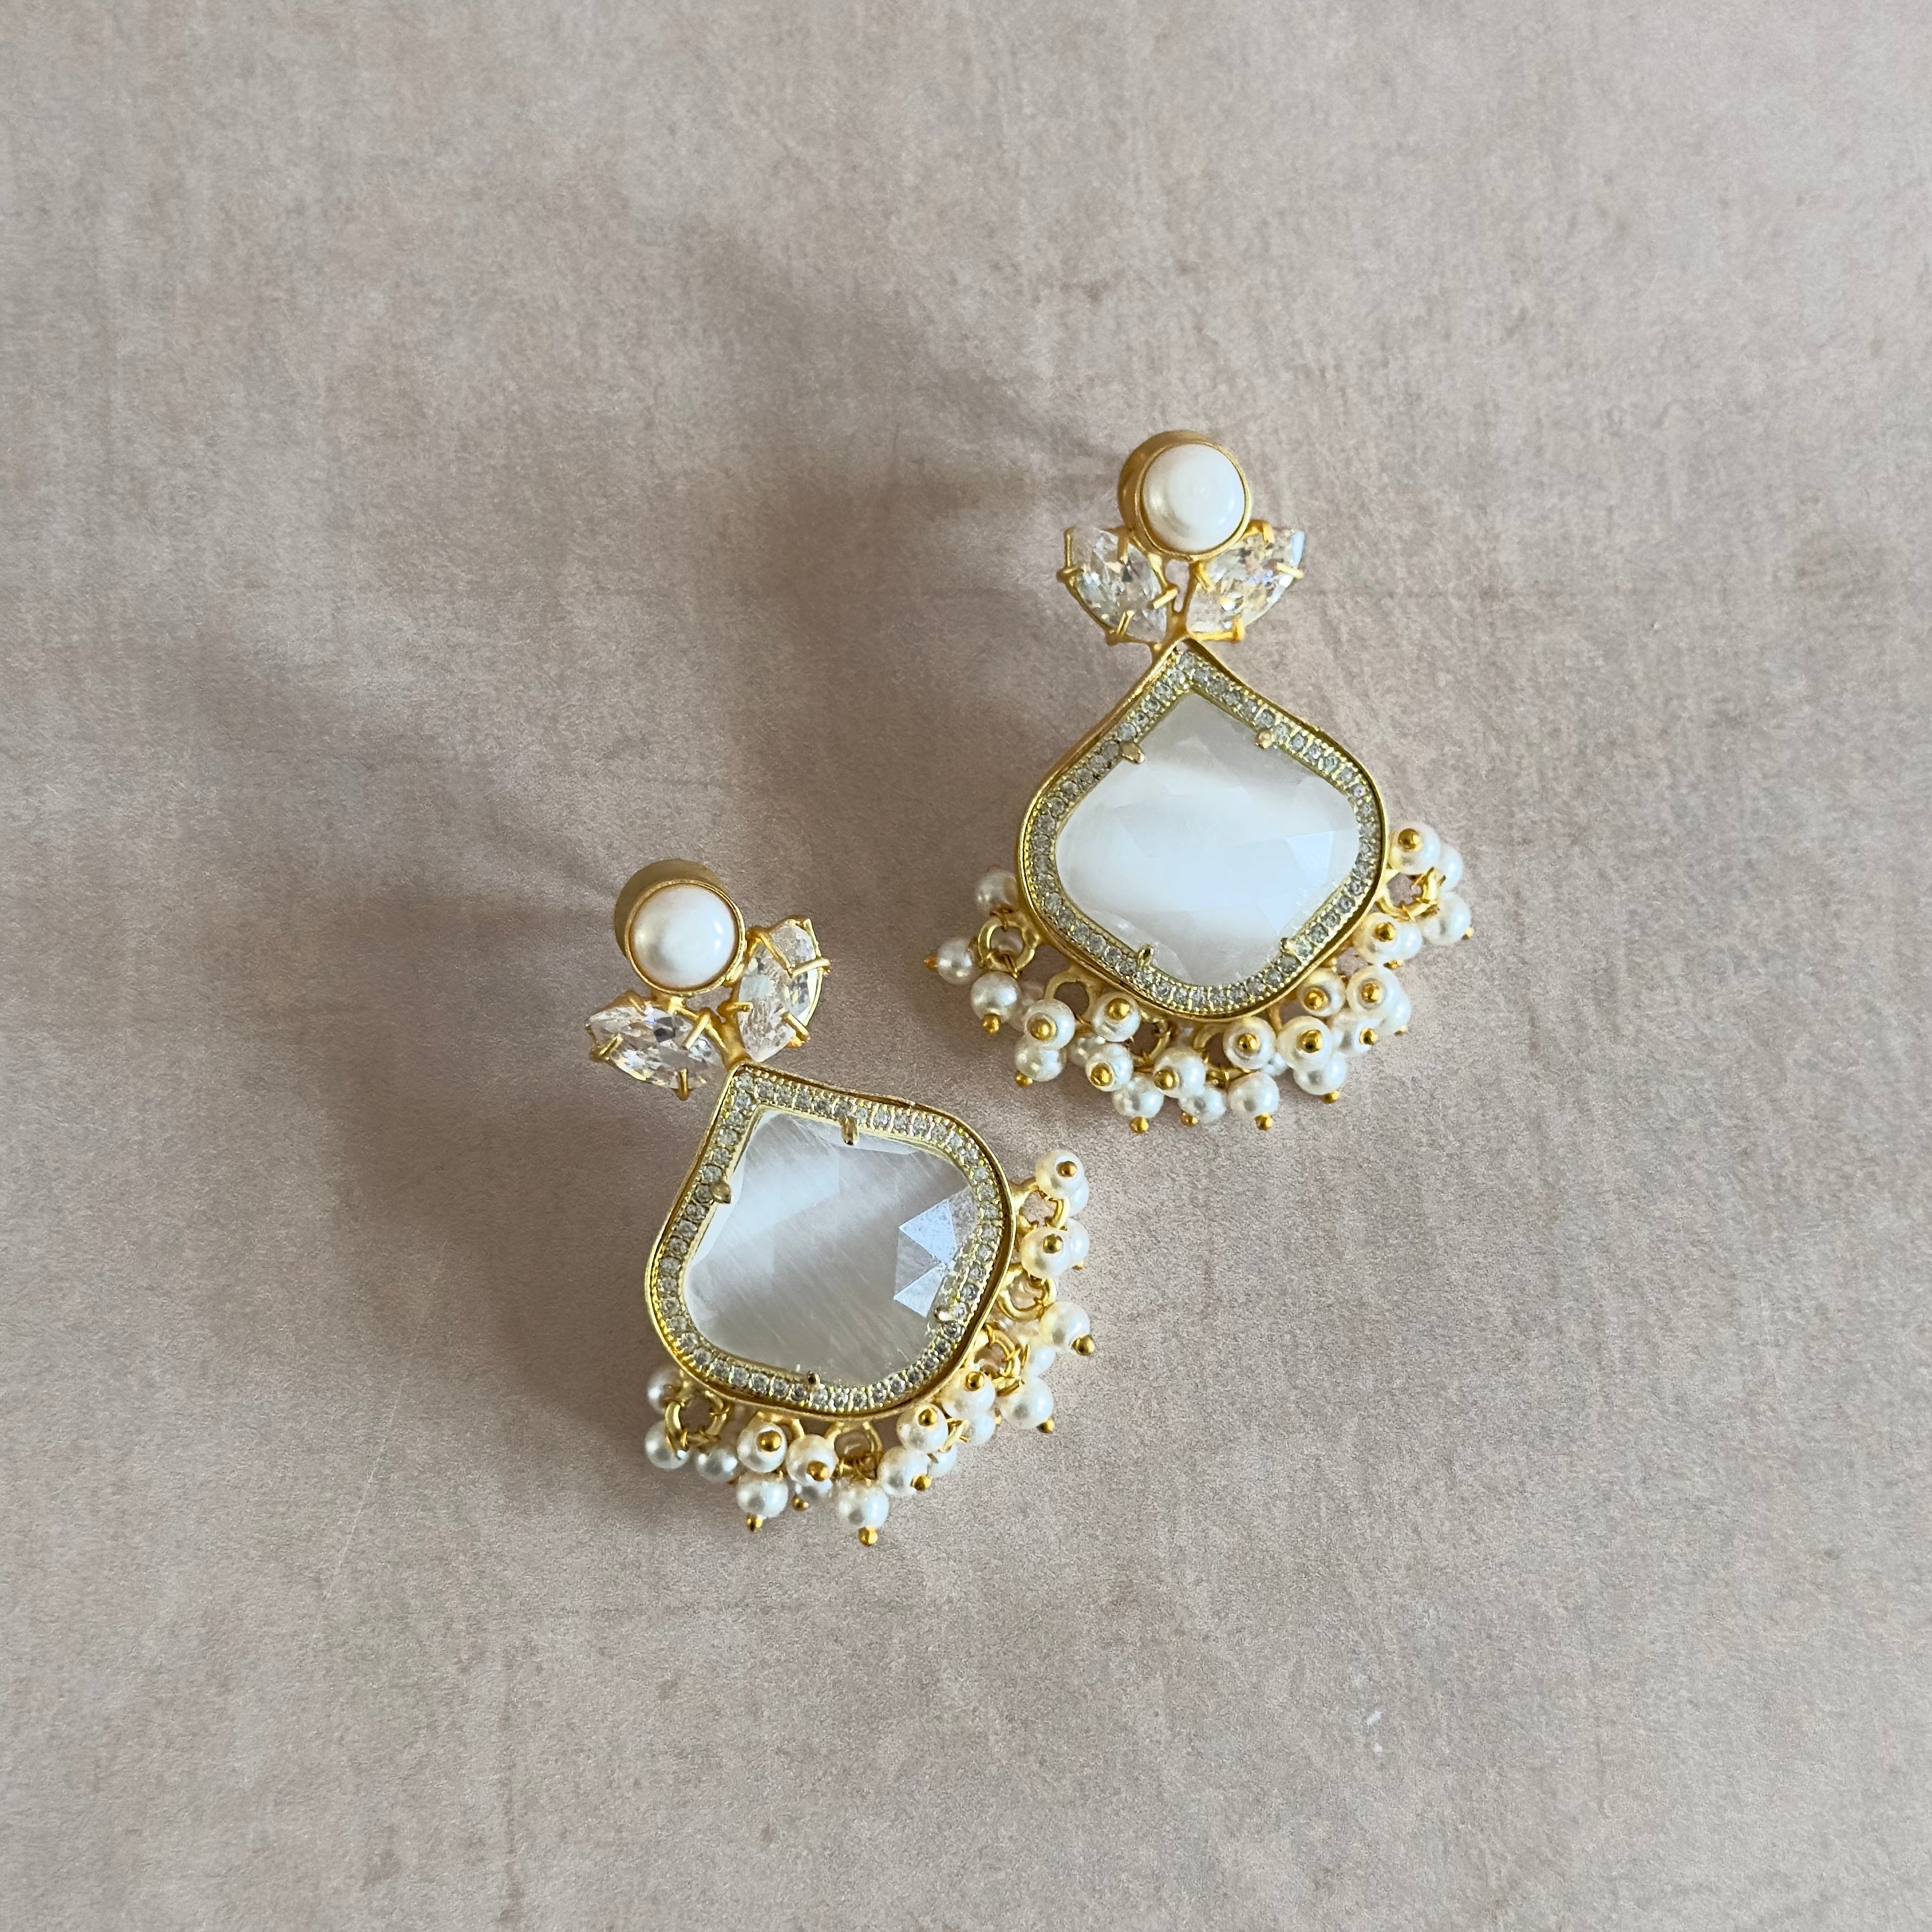 Introducing our Gaia Grey Pearl Earrings, a luscious new design featuring freshwater pearls and dazzling cz crystals. The beautiful grey stone adds a touch of elegance to these luxurious and exclusive earrings. Elevate your style today with these exquisite